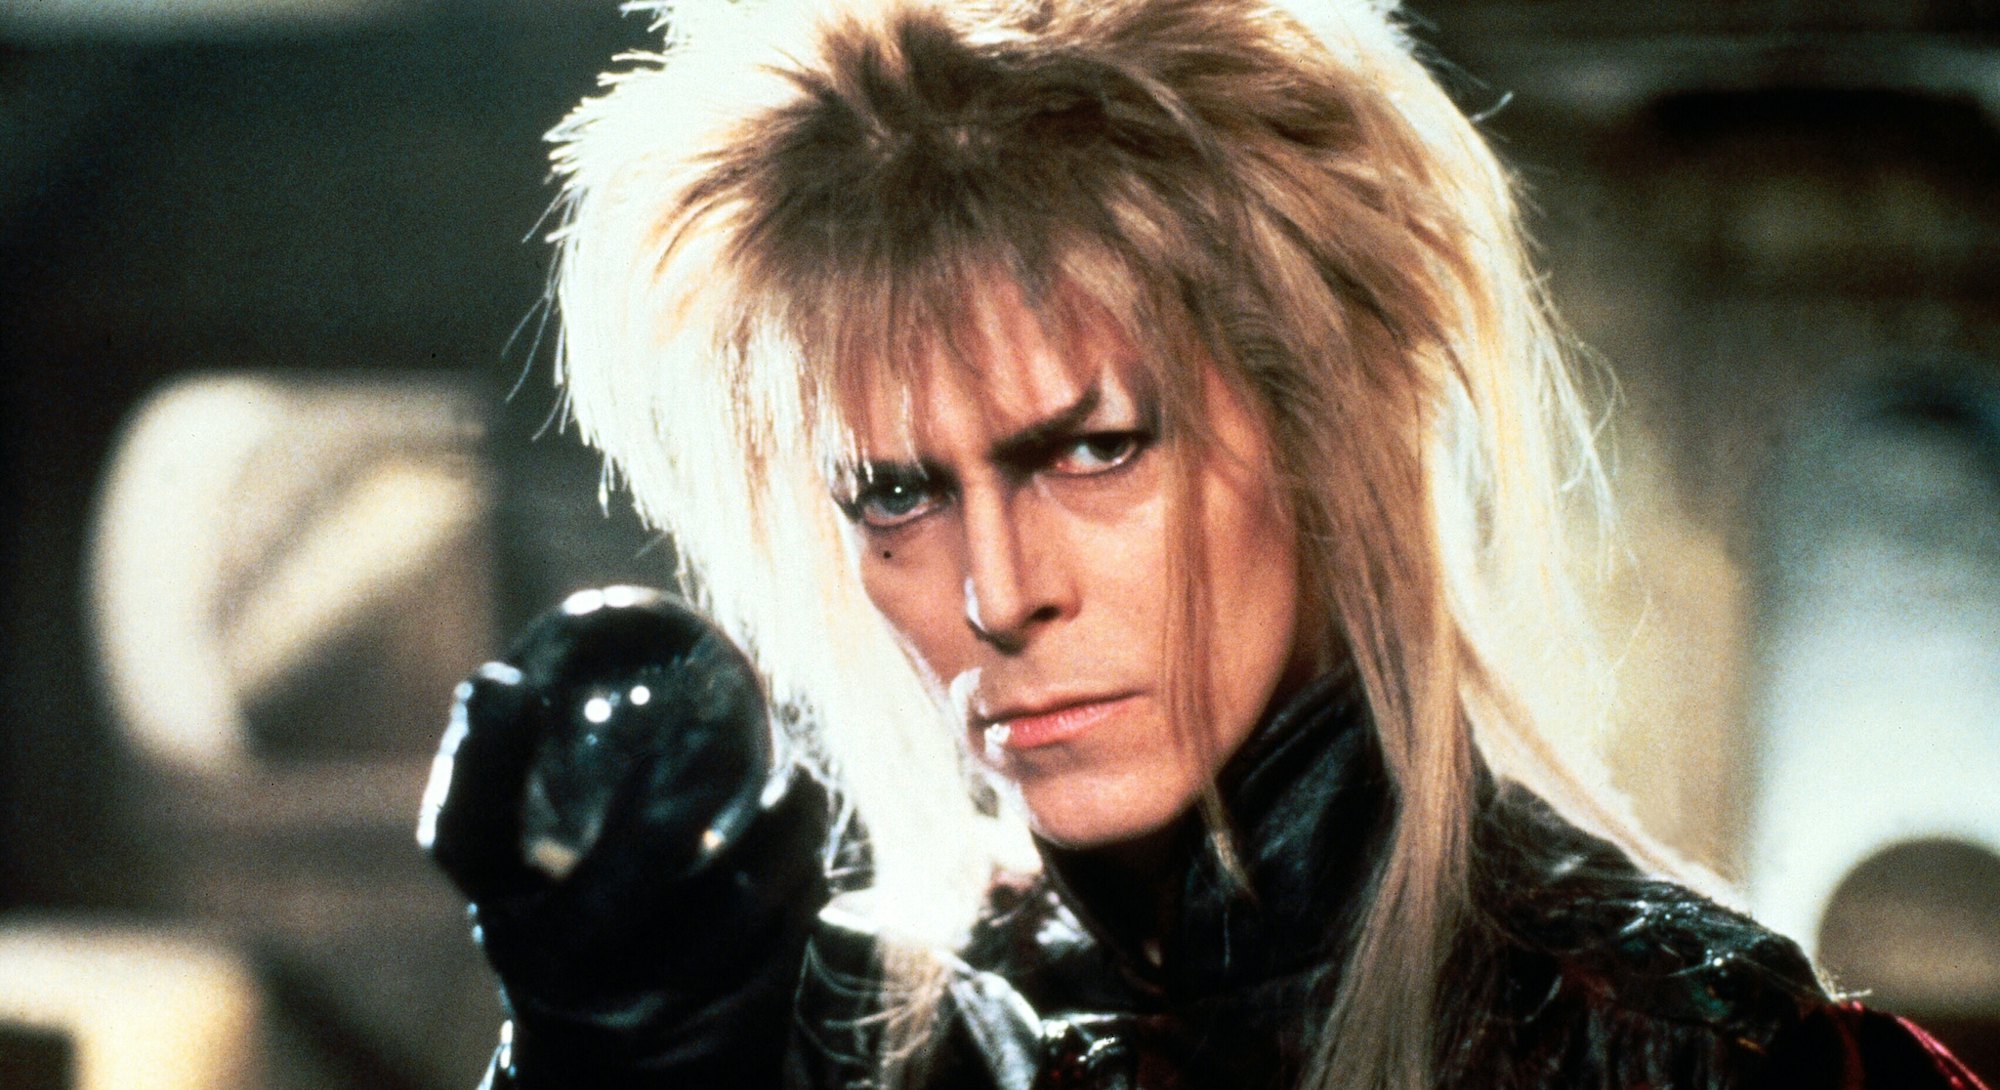 image of David Bowie in Labyrinth movie